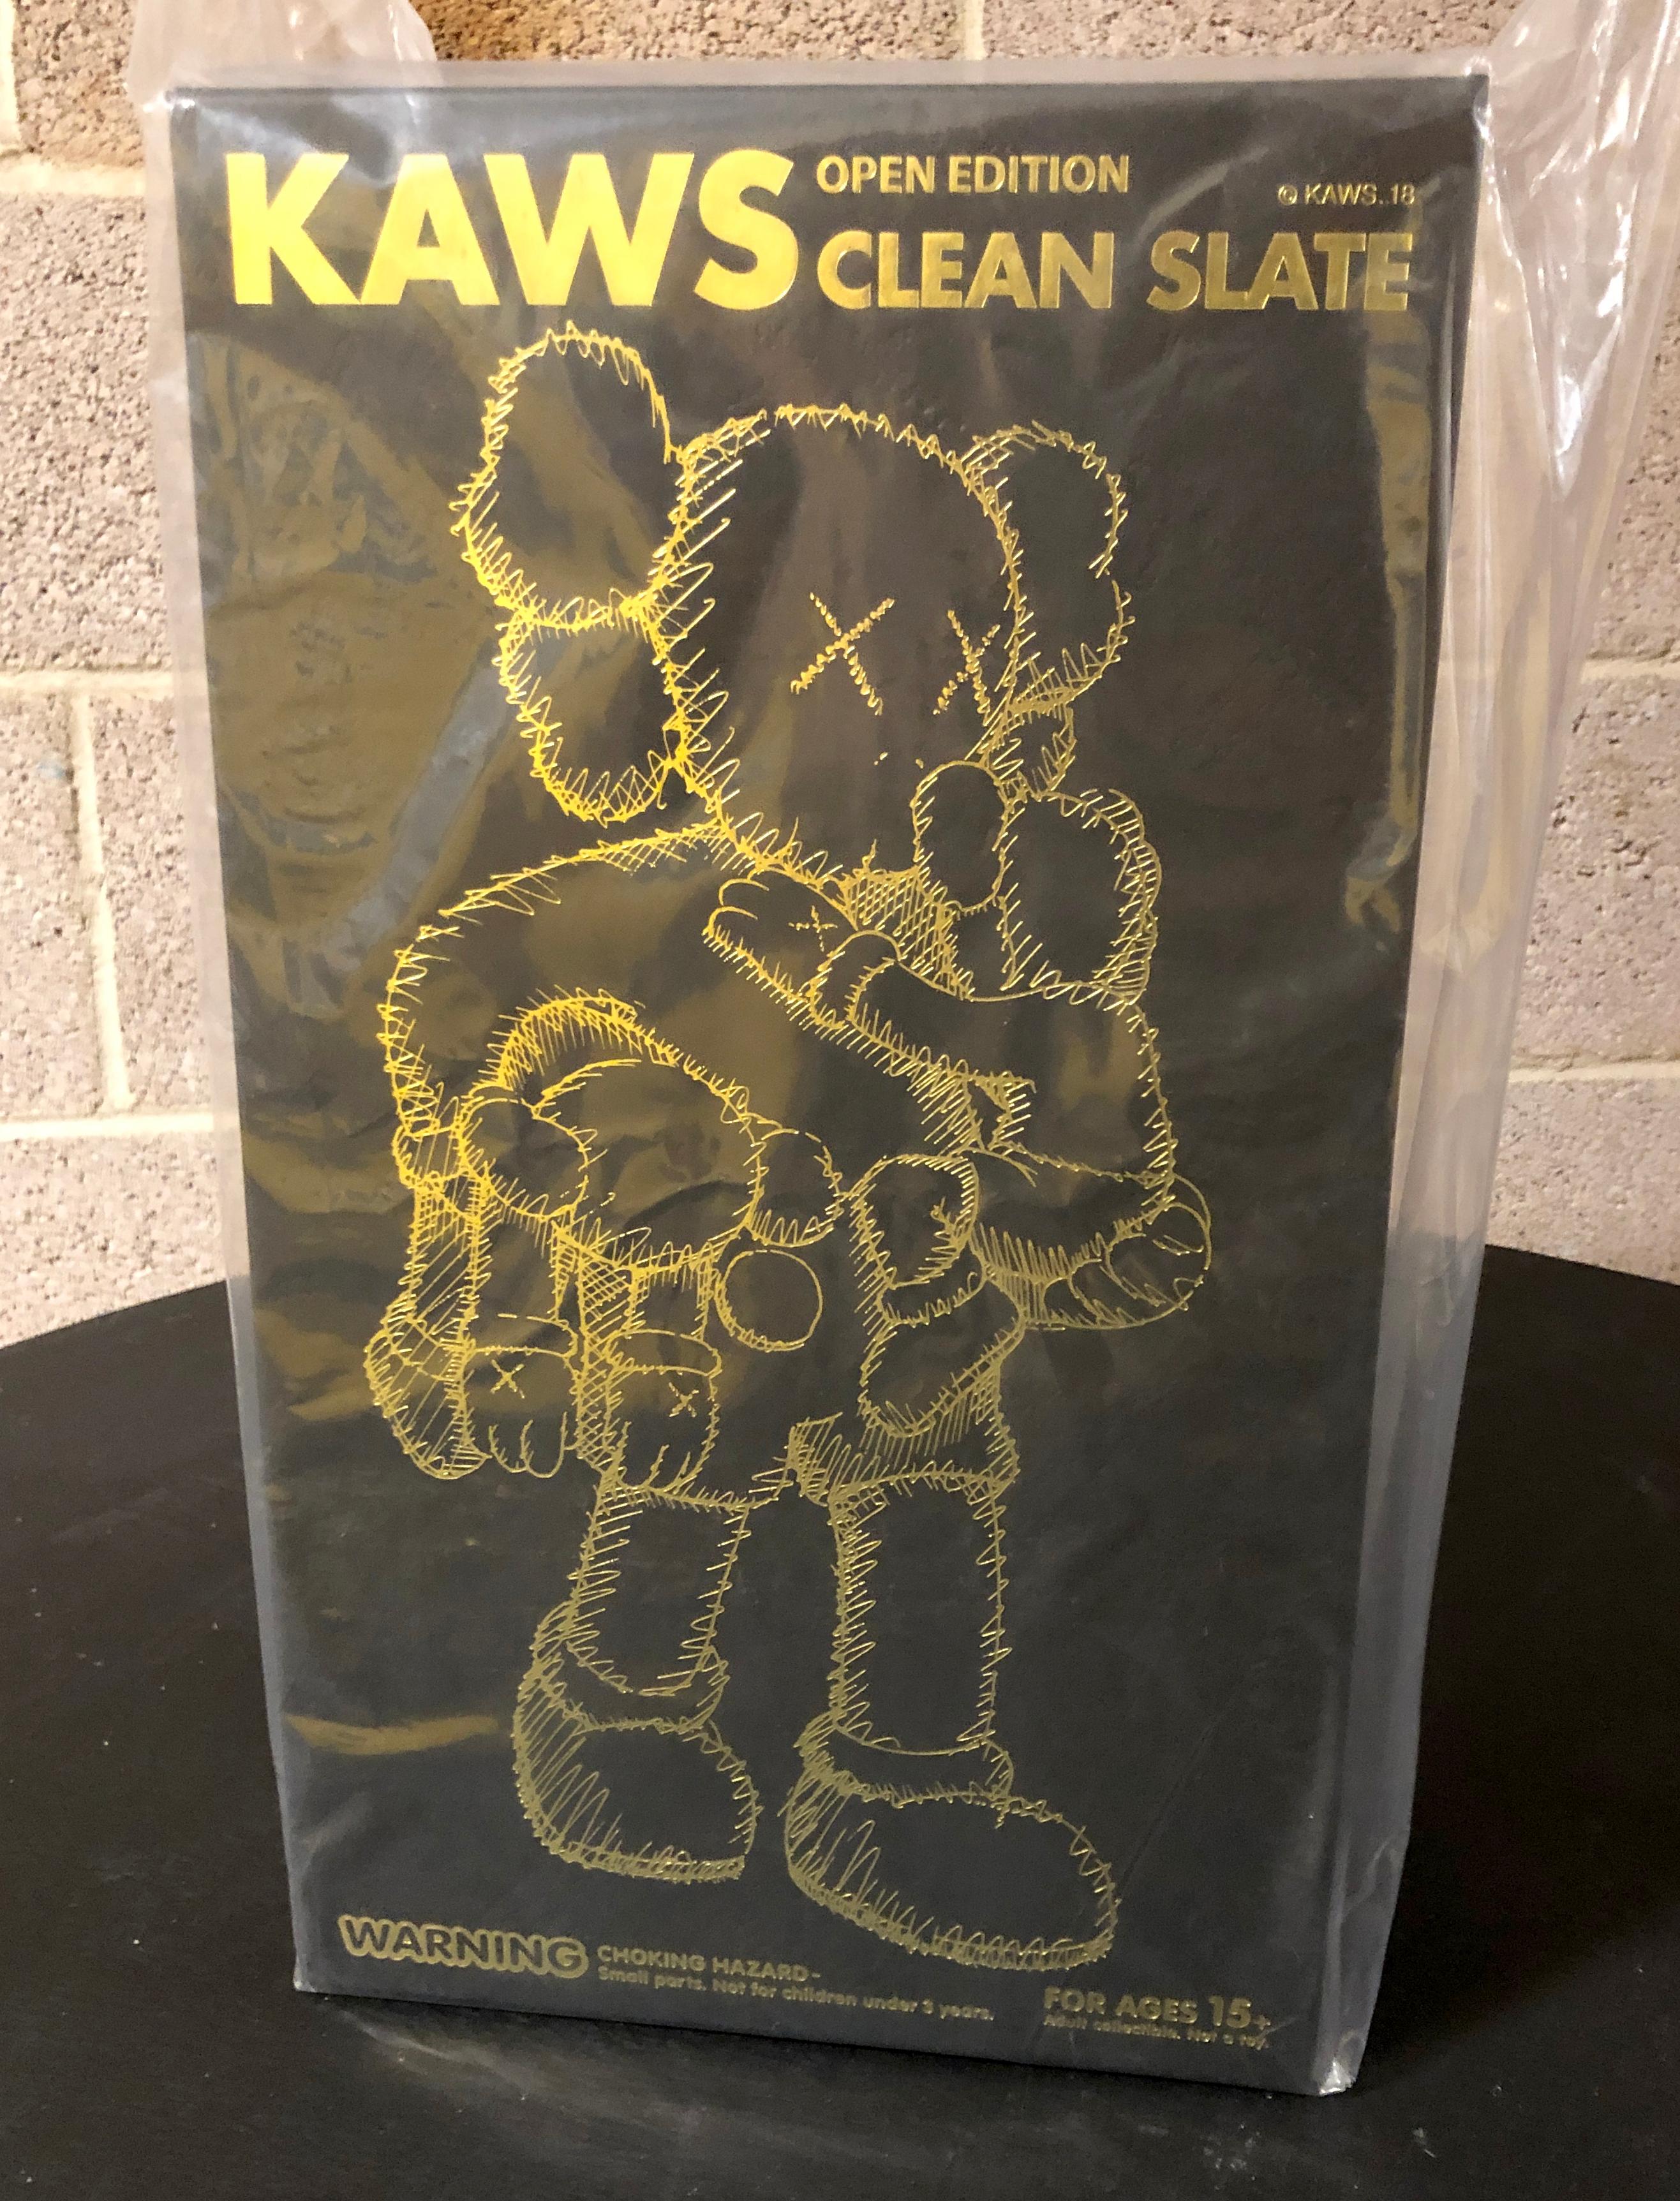 KAWS Clean Slate (Black), new & unopened in its original packaging. 
Sold Out  after the artist's retrospect exhibition at the Modern Art Museum of Fort Worth

Medium: Vinyl & Cast Resin
14.25 x 7 x 7 inches
Artwork in excellent condition.
